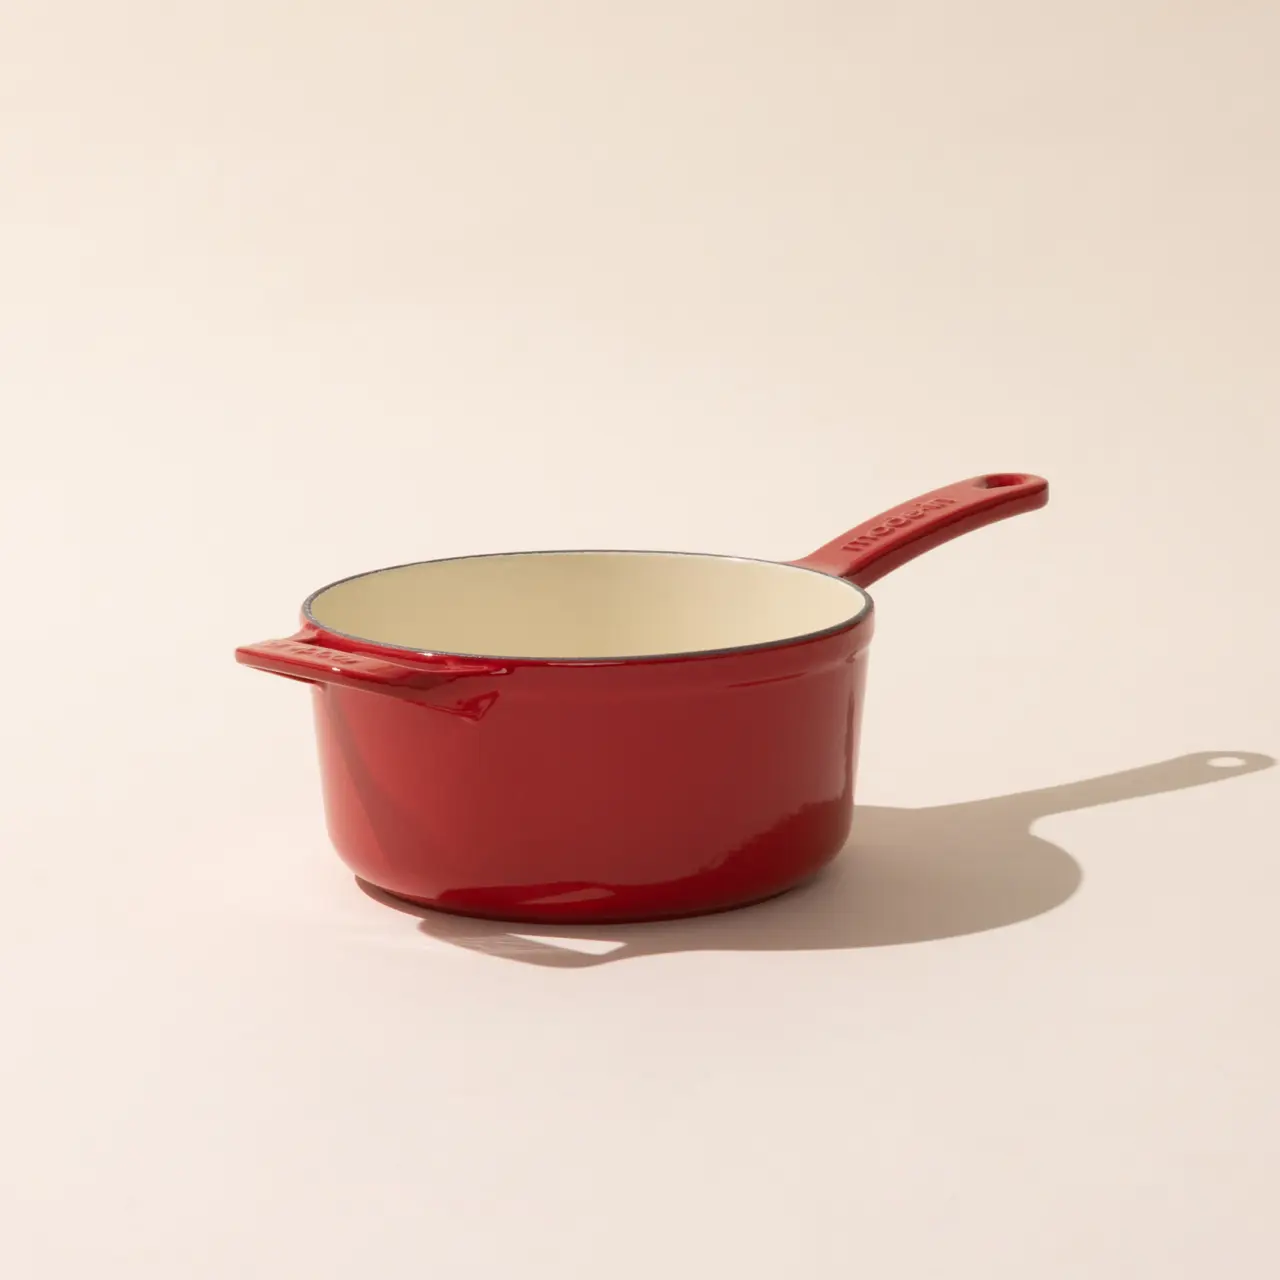 enameled cast iron saucepan made in red